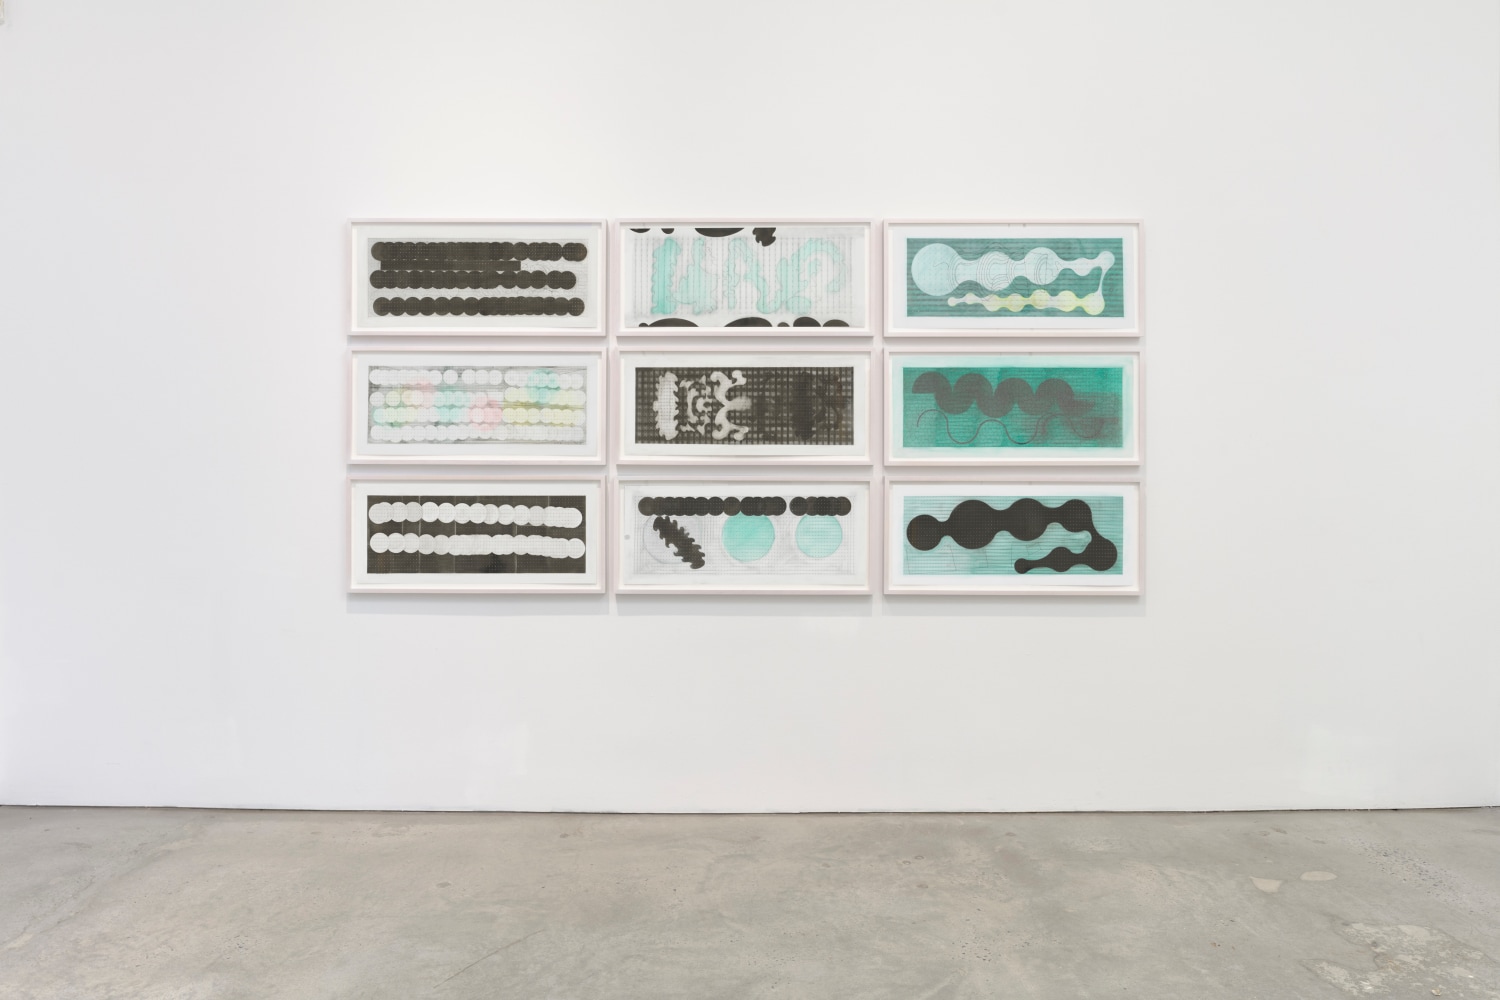 Installation view of several mixed media works by Gustavo Pérez Monzón